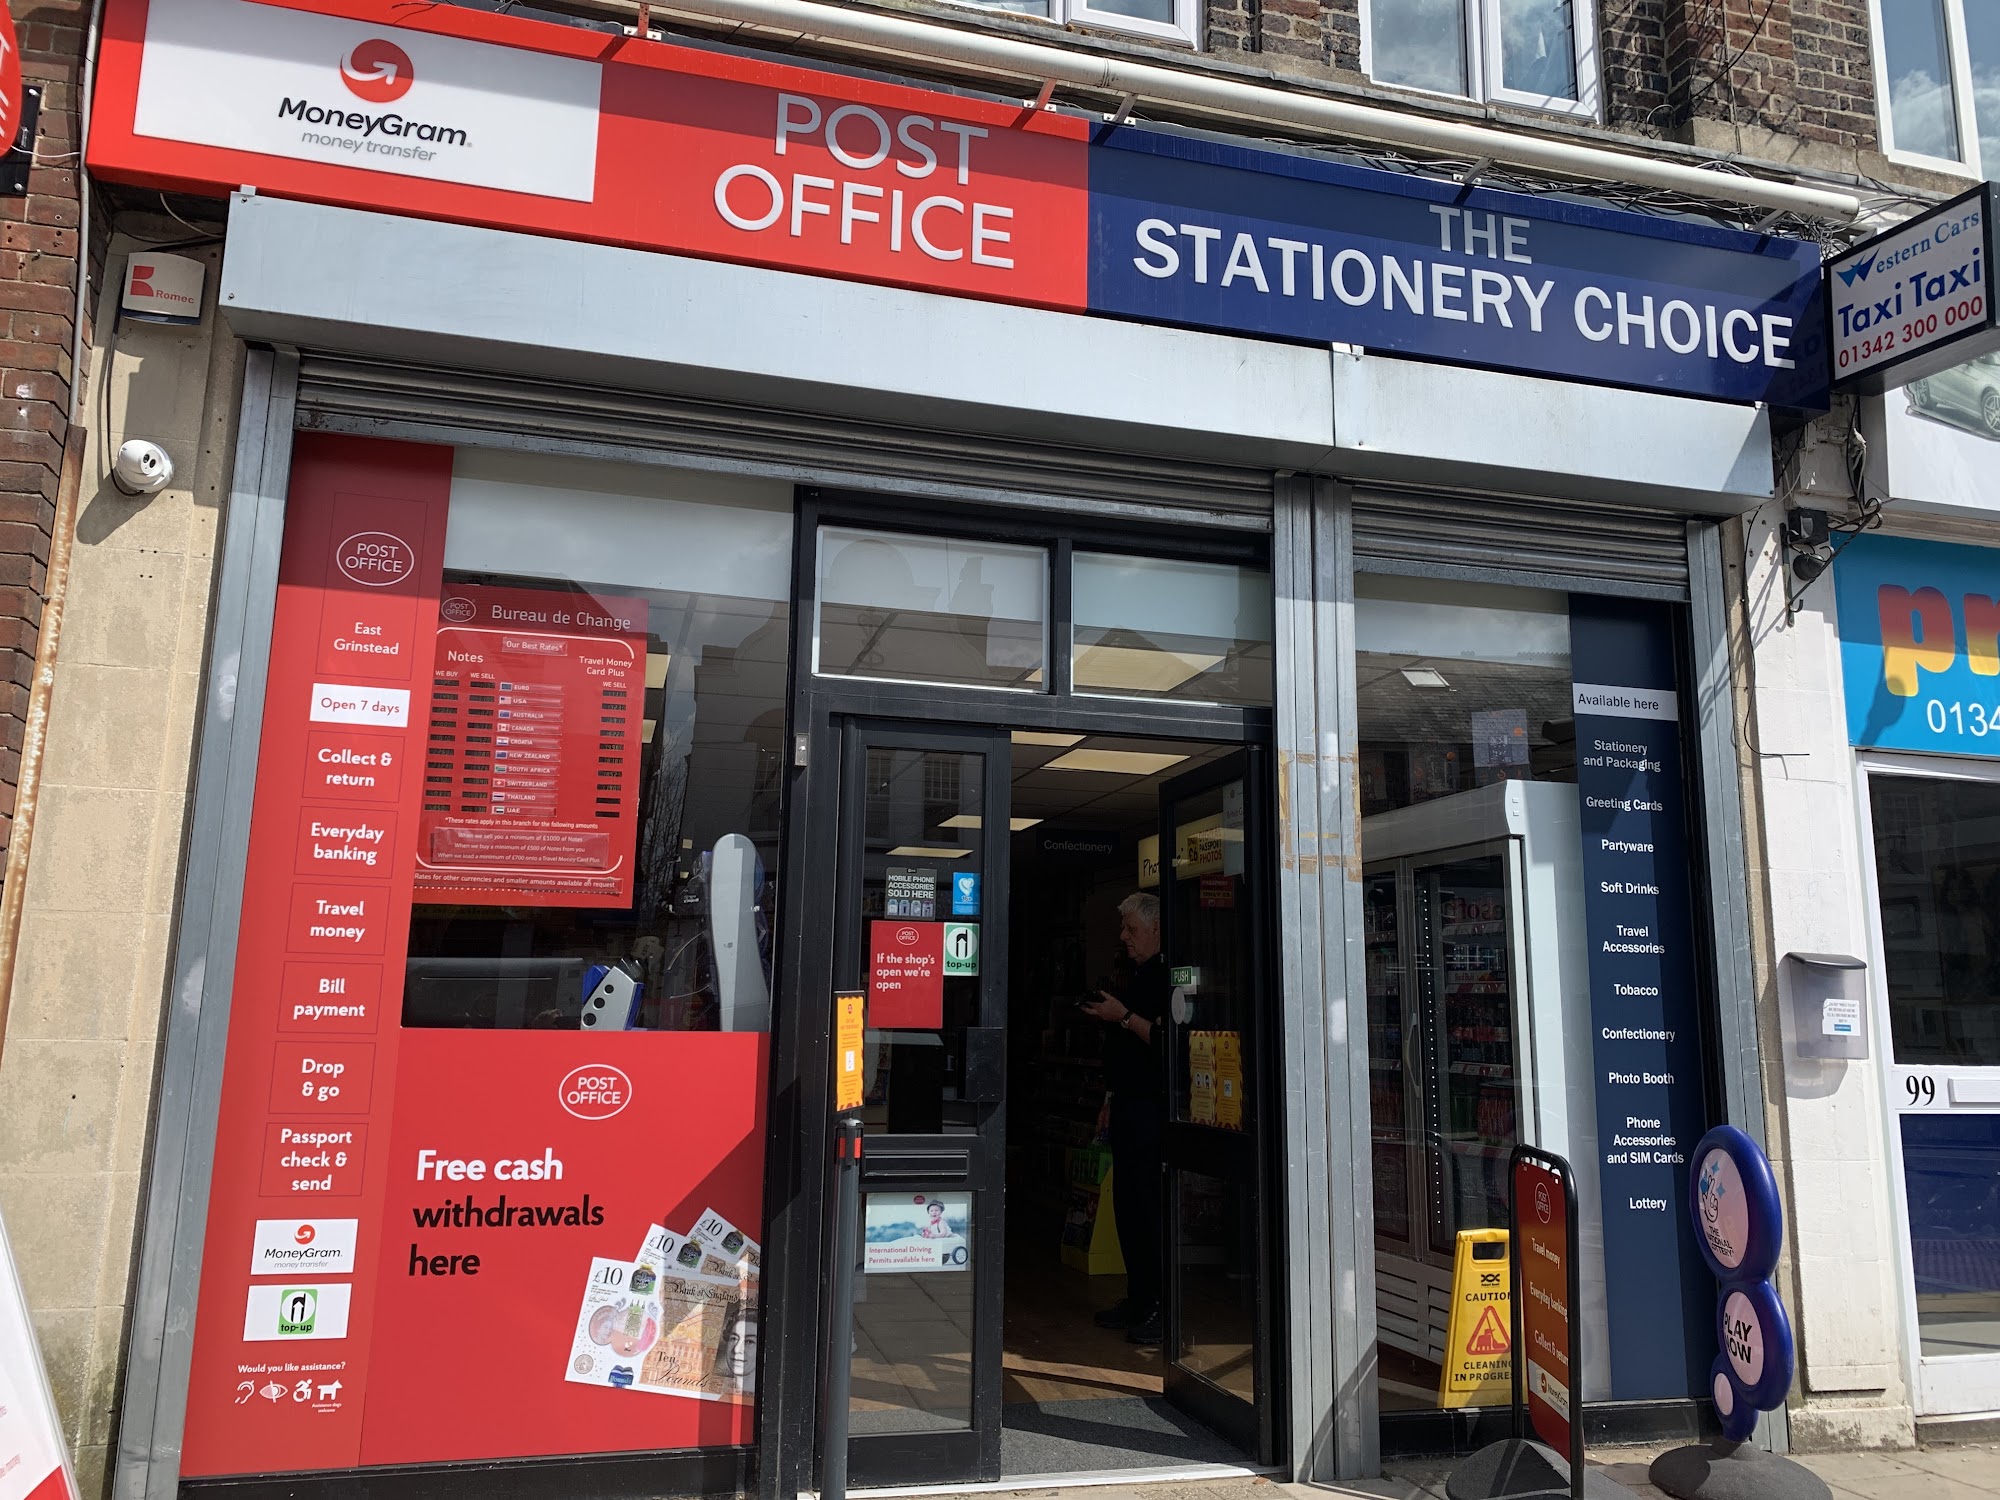 East Grinstead Post Office & The Stationery Choice